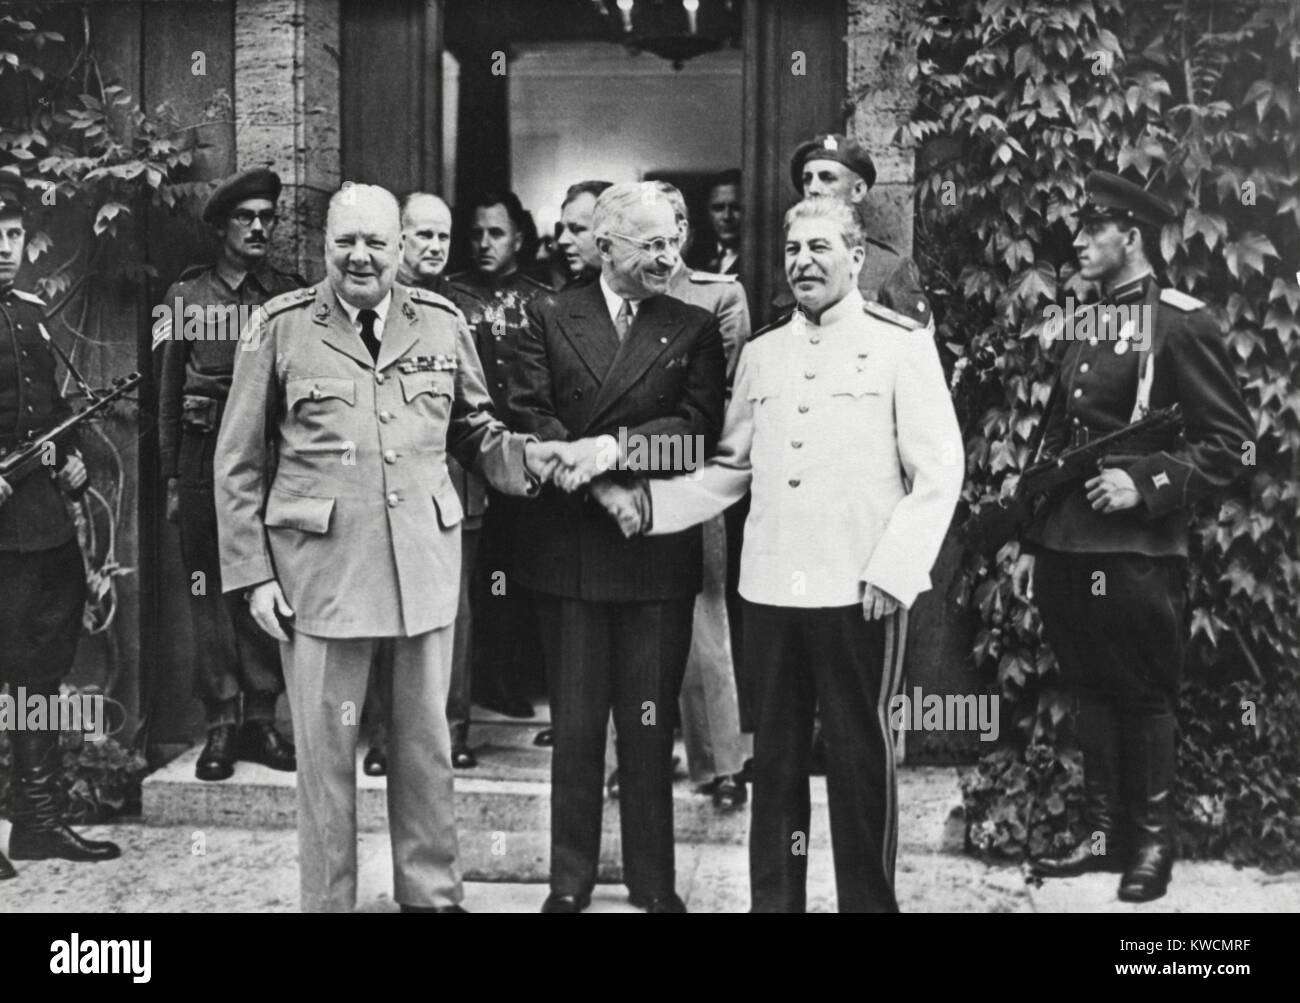 Joseph Stalin, Harry Truman, and Winston Churchill at the Potsdam Conference. While there, Churchill's Conservative Party lost to Labour, and Clement Attlee became Britain's representative at the Conference. July 1945. - (BSLOC 2014 15 25) Stock Photo